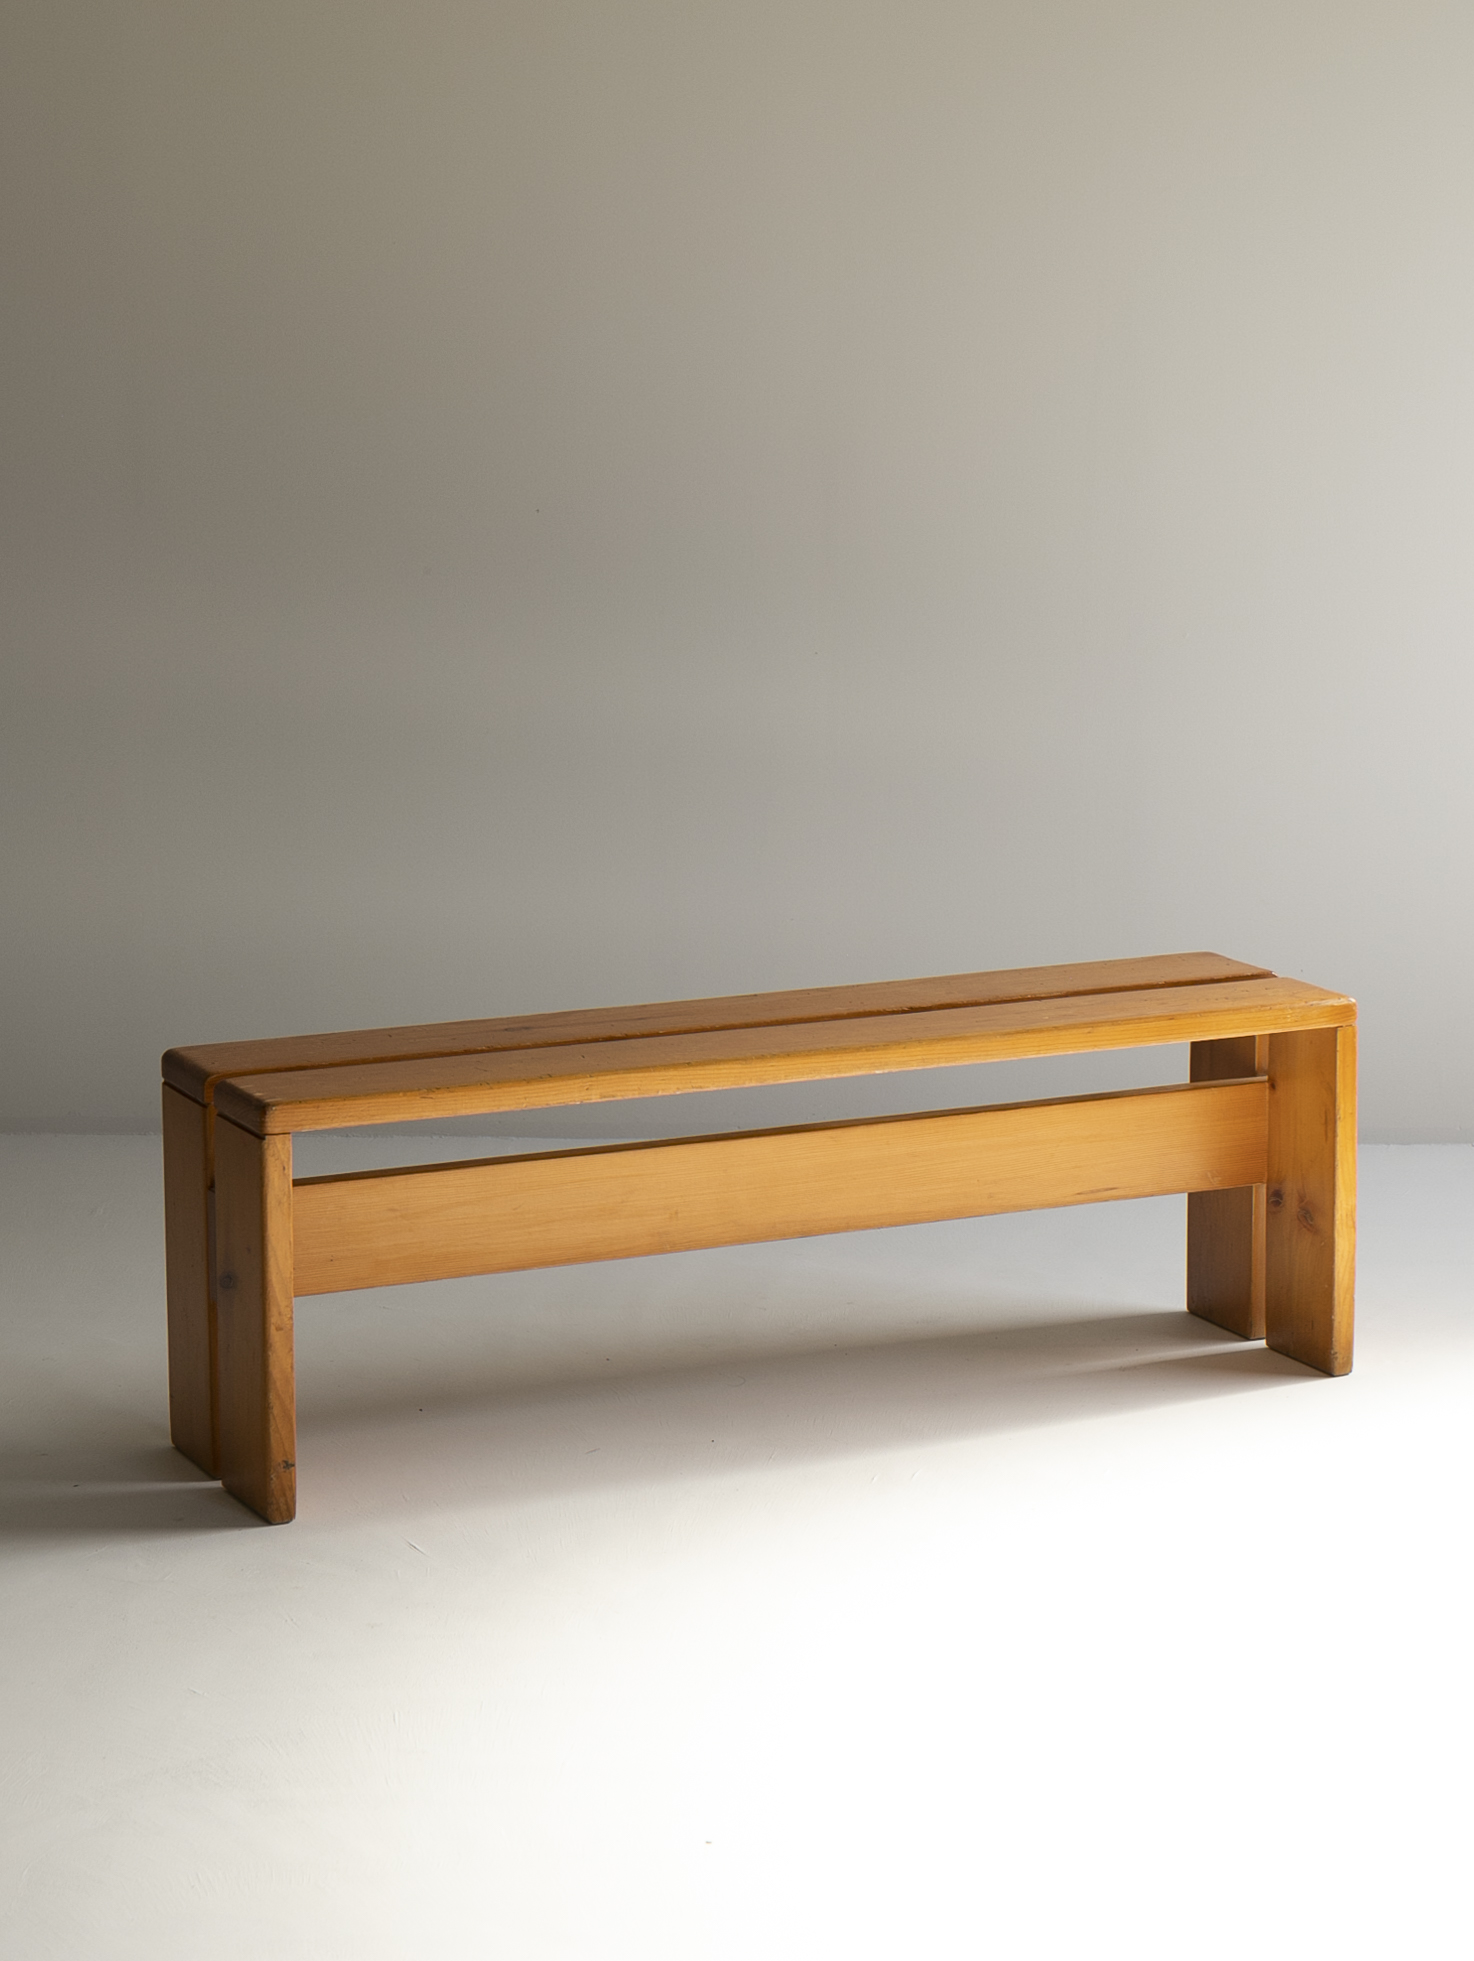 Pine Bench for Arc 1600 by CharlottePerriand